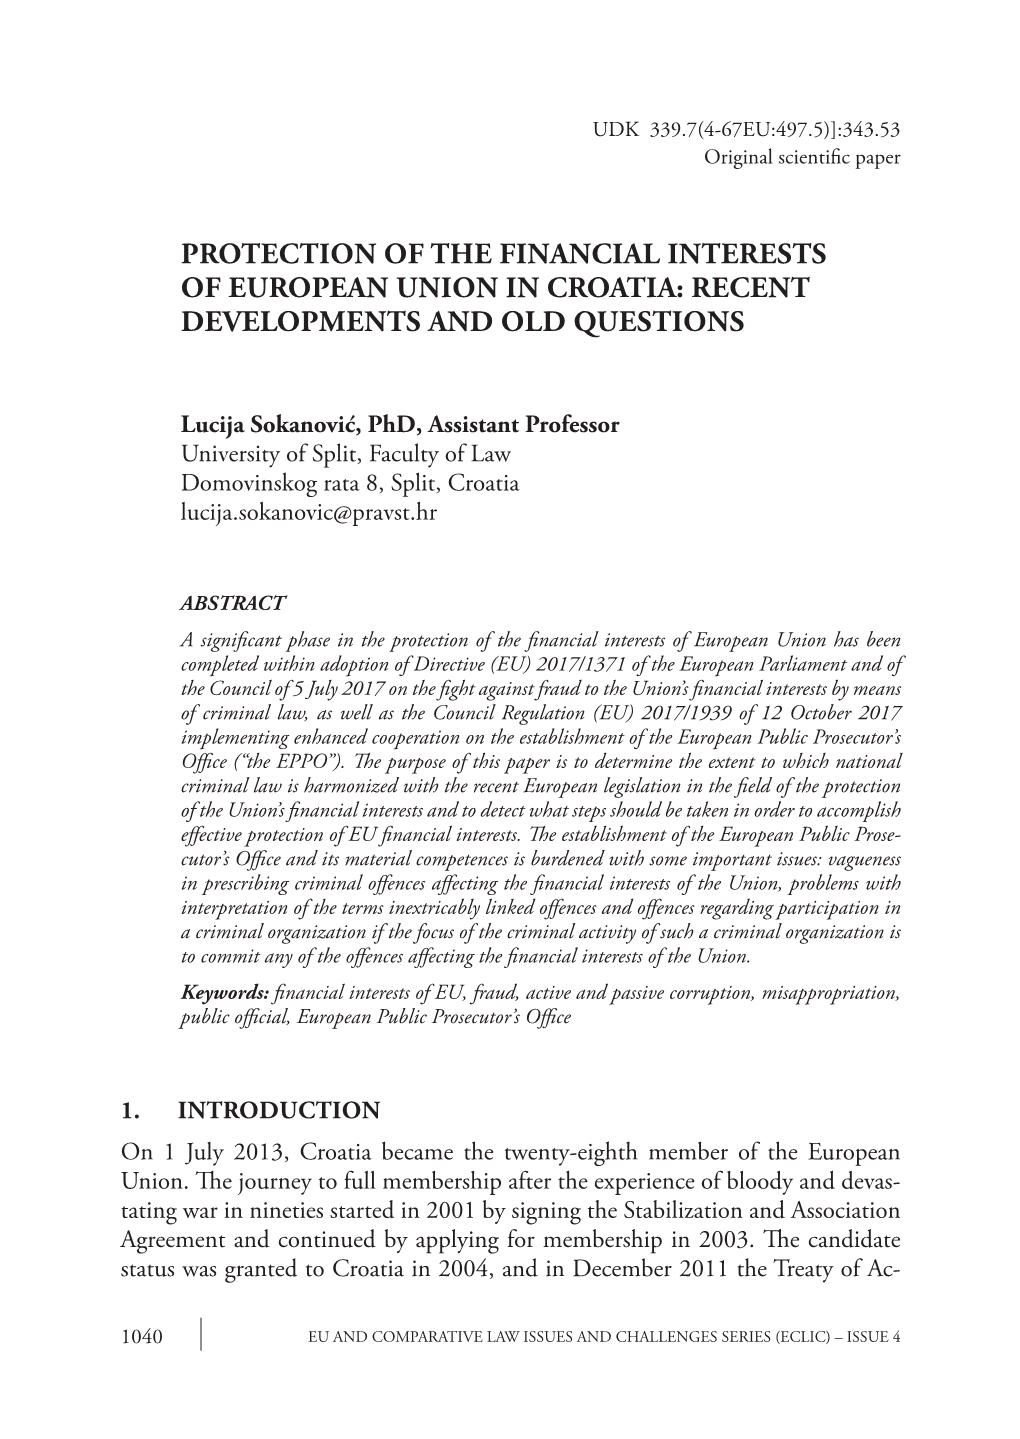 Protection of the Financial Interests of European Union in Croatia: Recent Developments and Old Questions